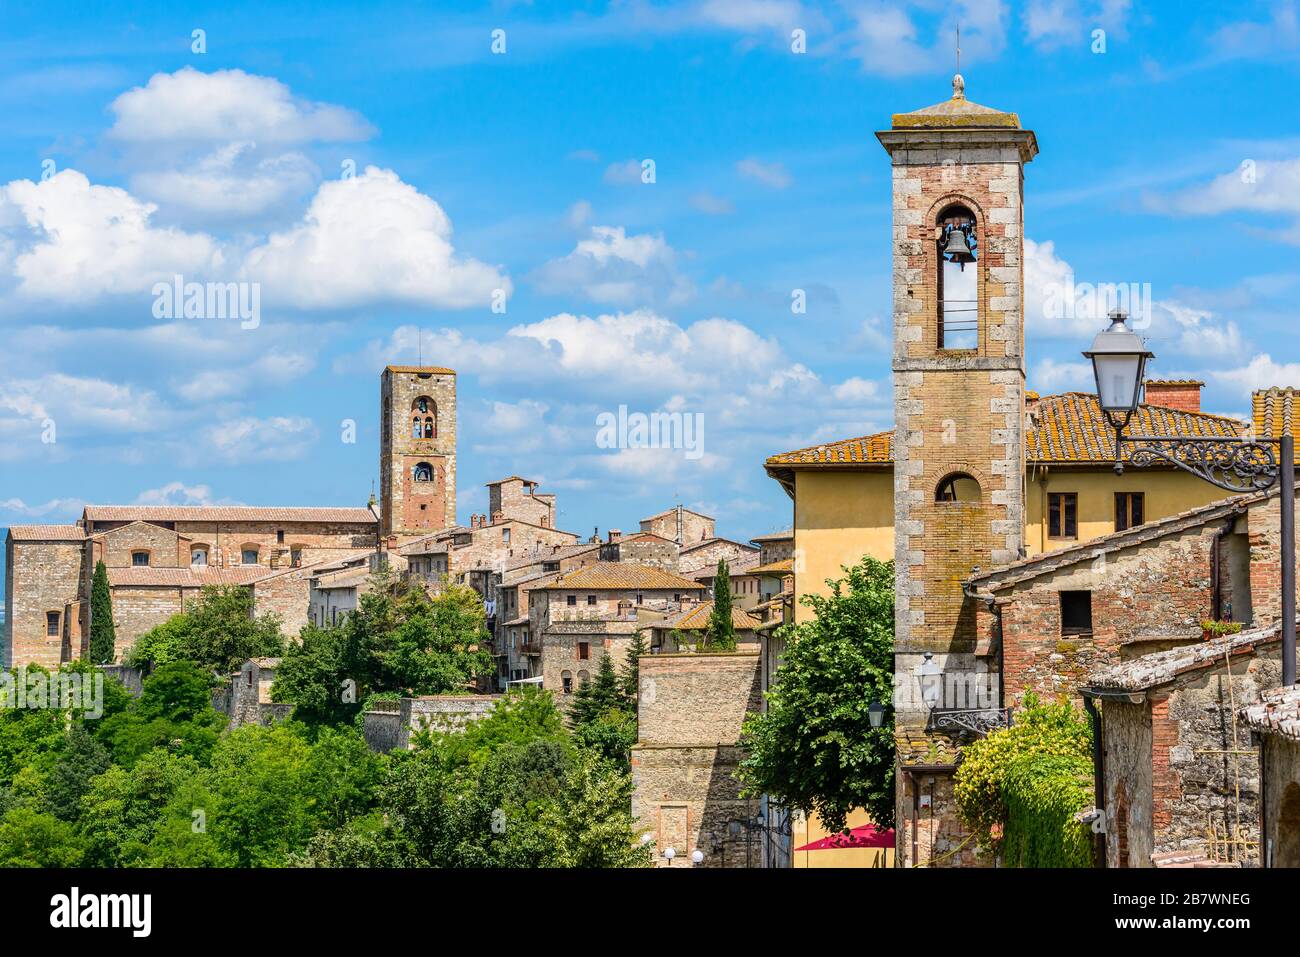 Colle di Val d'Elsa, Tuscany: The bell tower of the Church of St. Catherine, the Colle di Val d'Elsa Cathedral and houses of the historic Colle Alta. Stock Photo